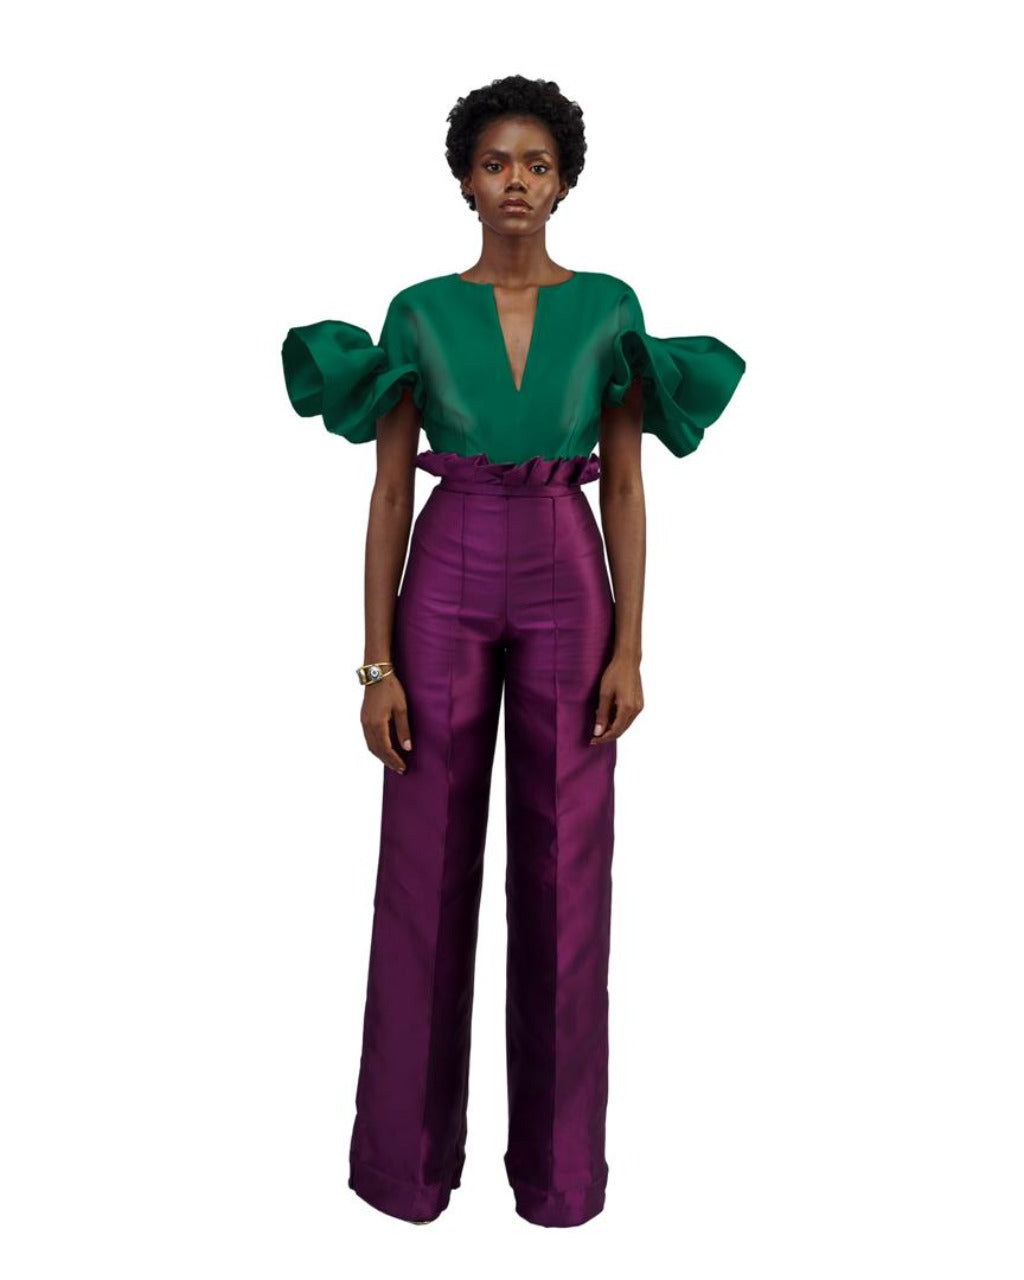 A model wearing aubergine colored pants with a green top in a white room